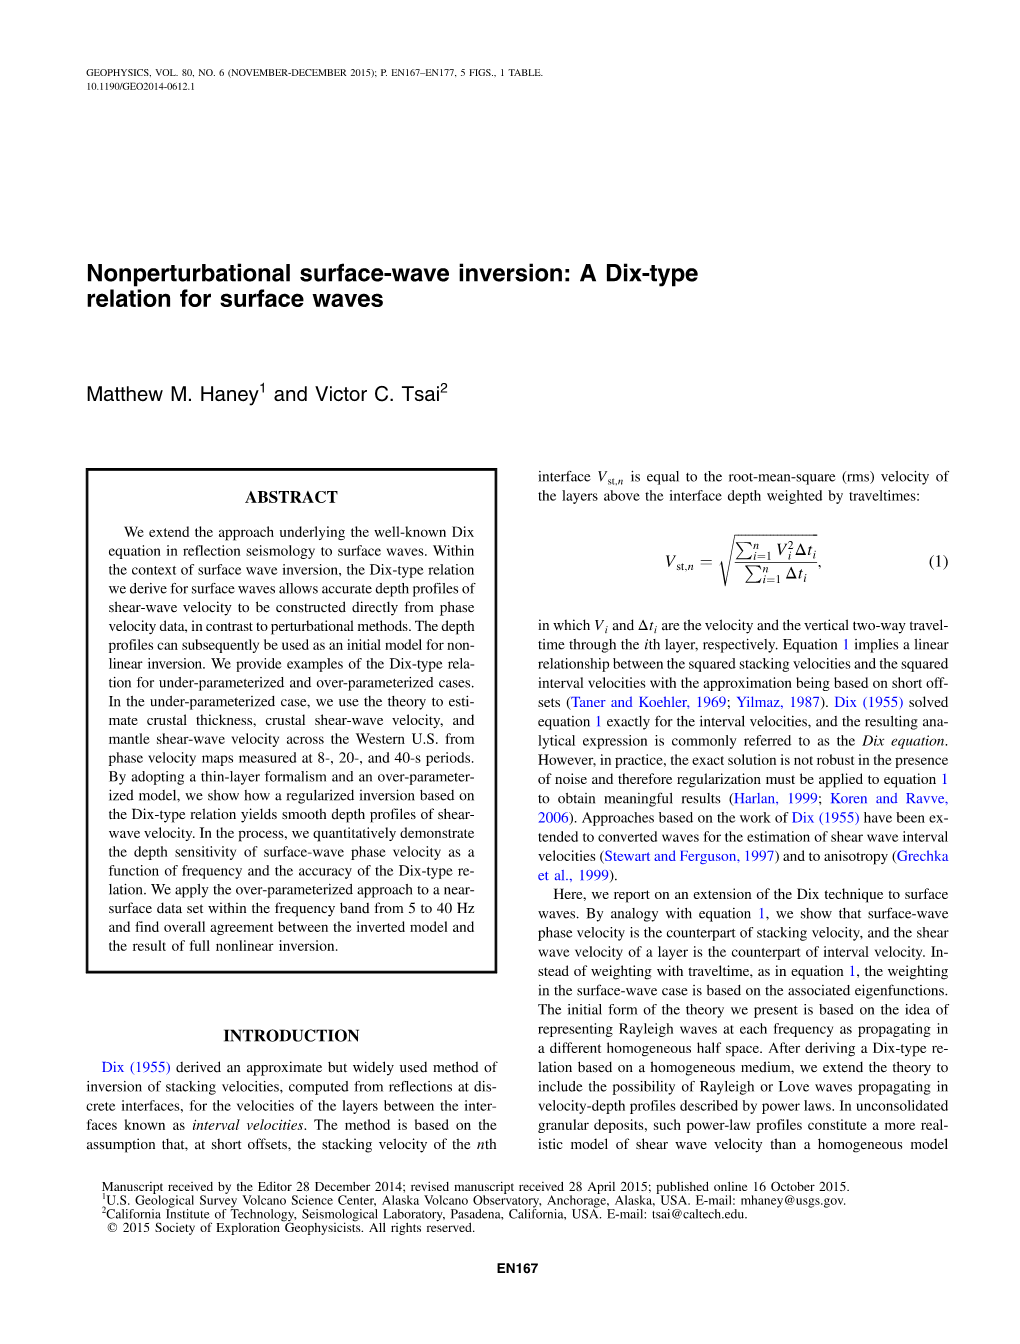 Nonperturbational Surface-Wave Inversion: a Dix-Type Relation for Surface Waves